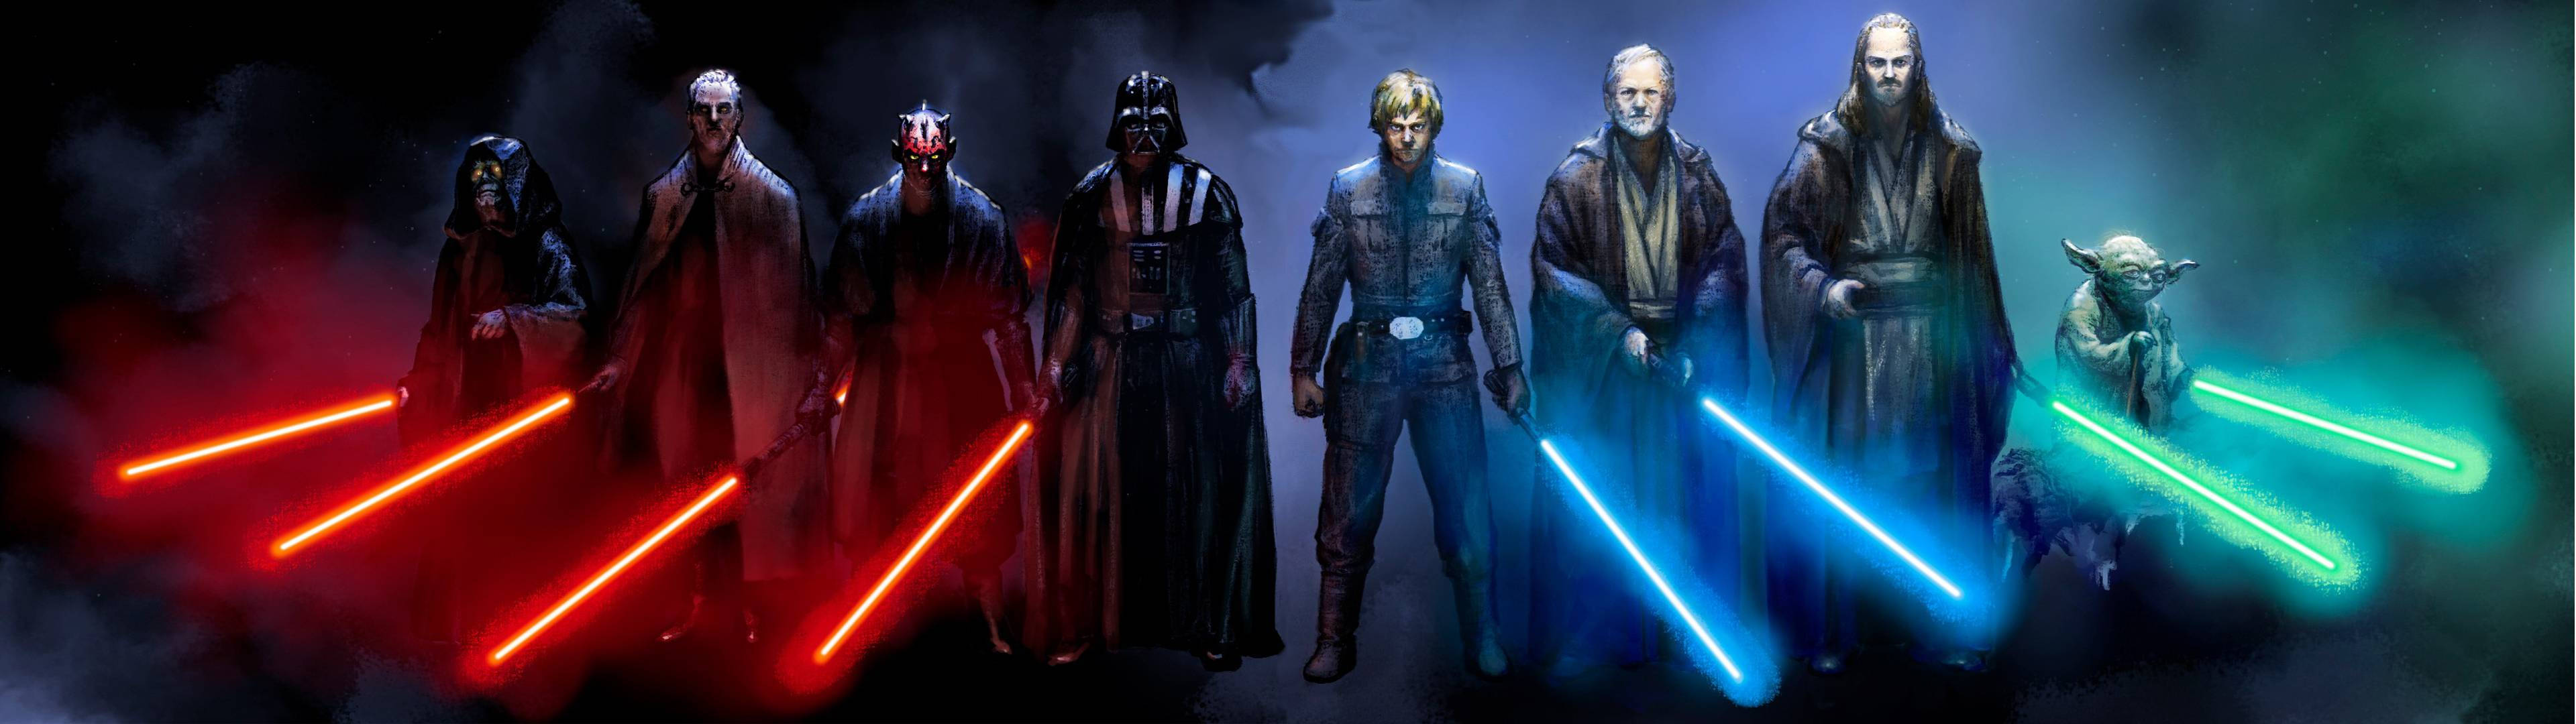 Star Wars Villains Dual Screen Cover Background